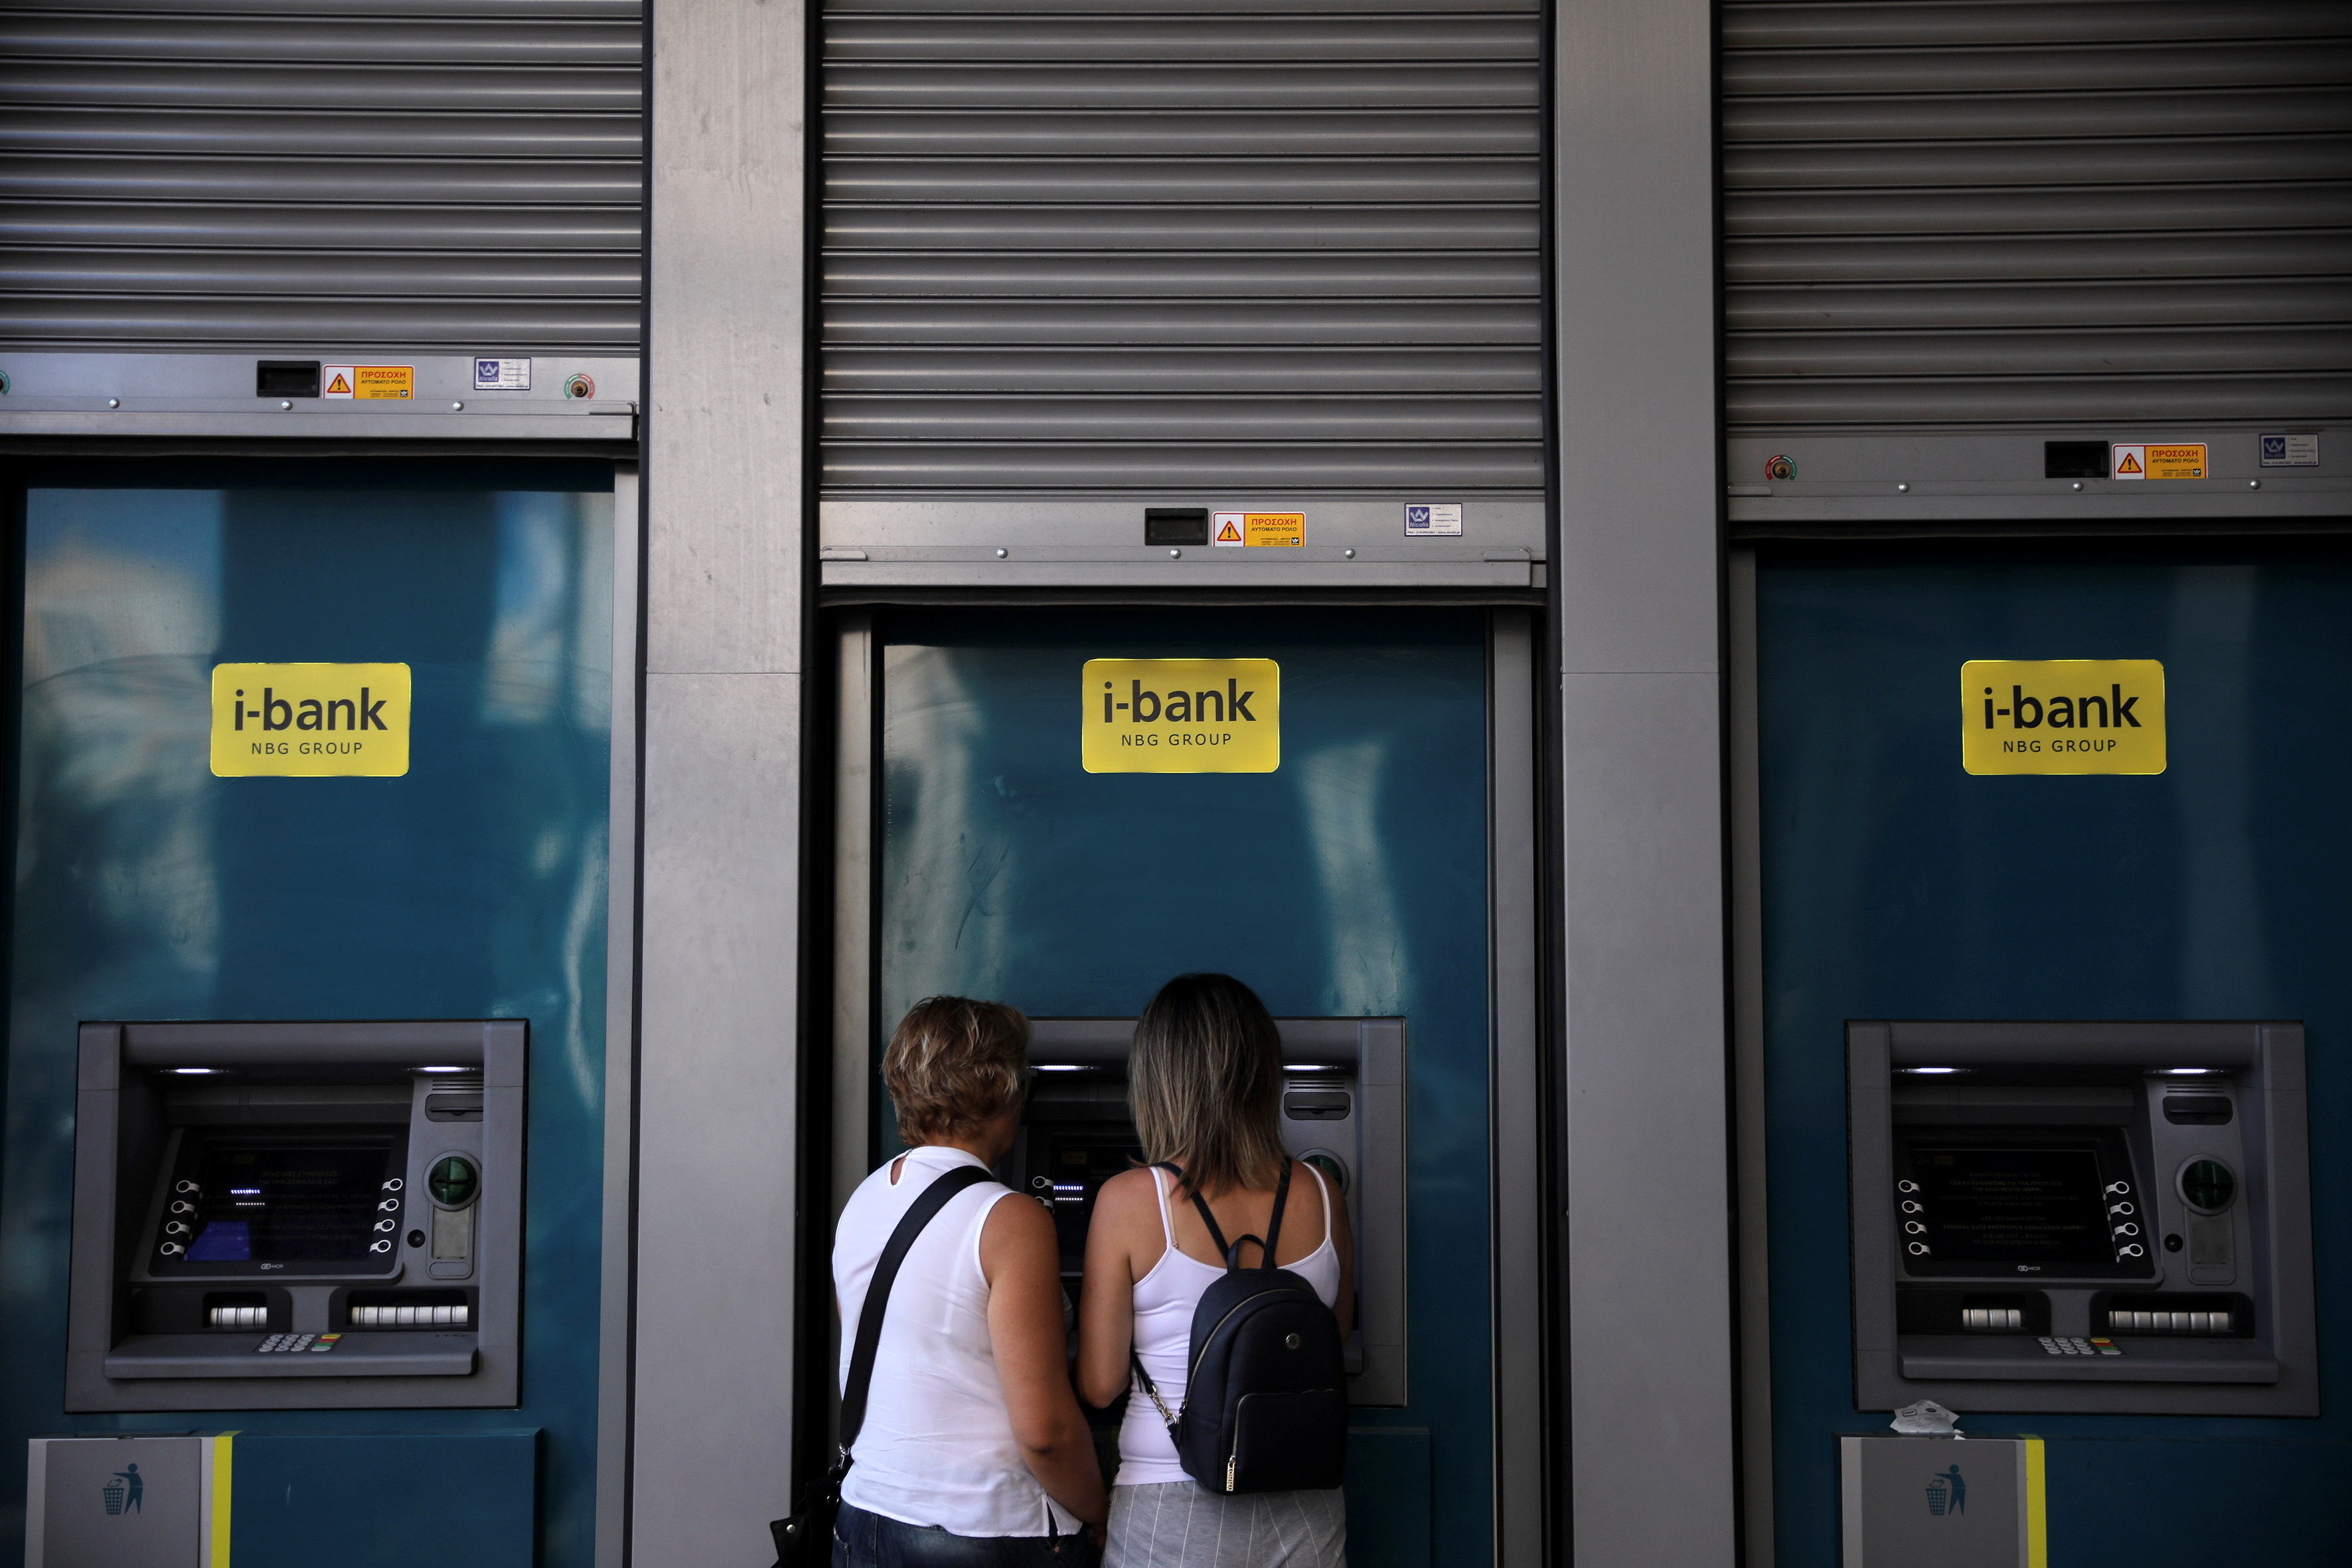 Two women use an ATM outside a National Bank branch in Athens